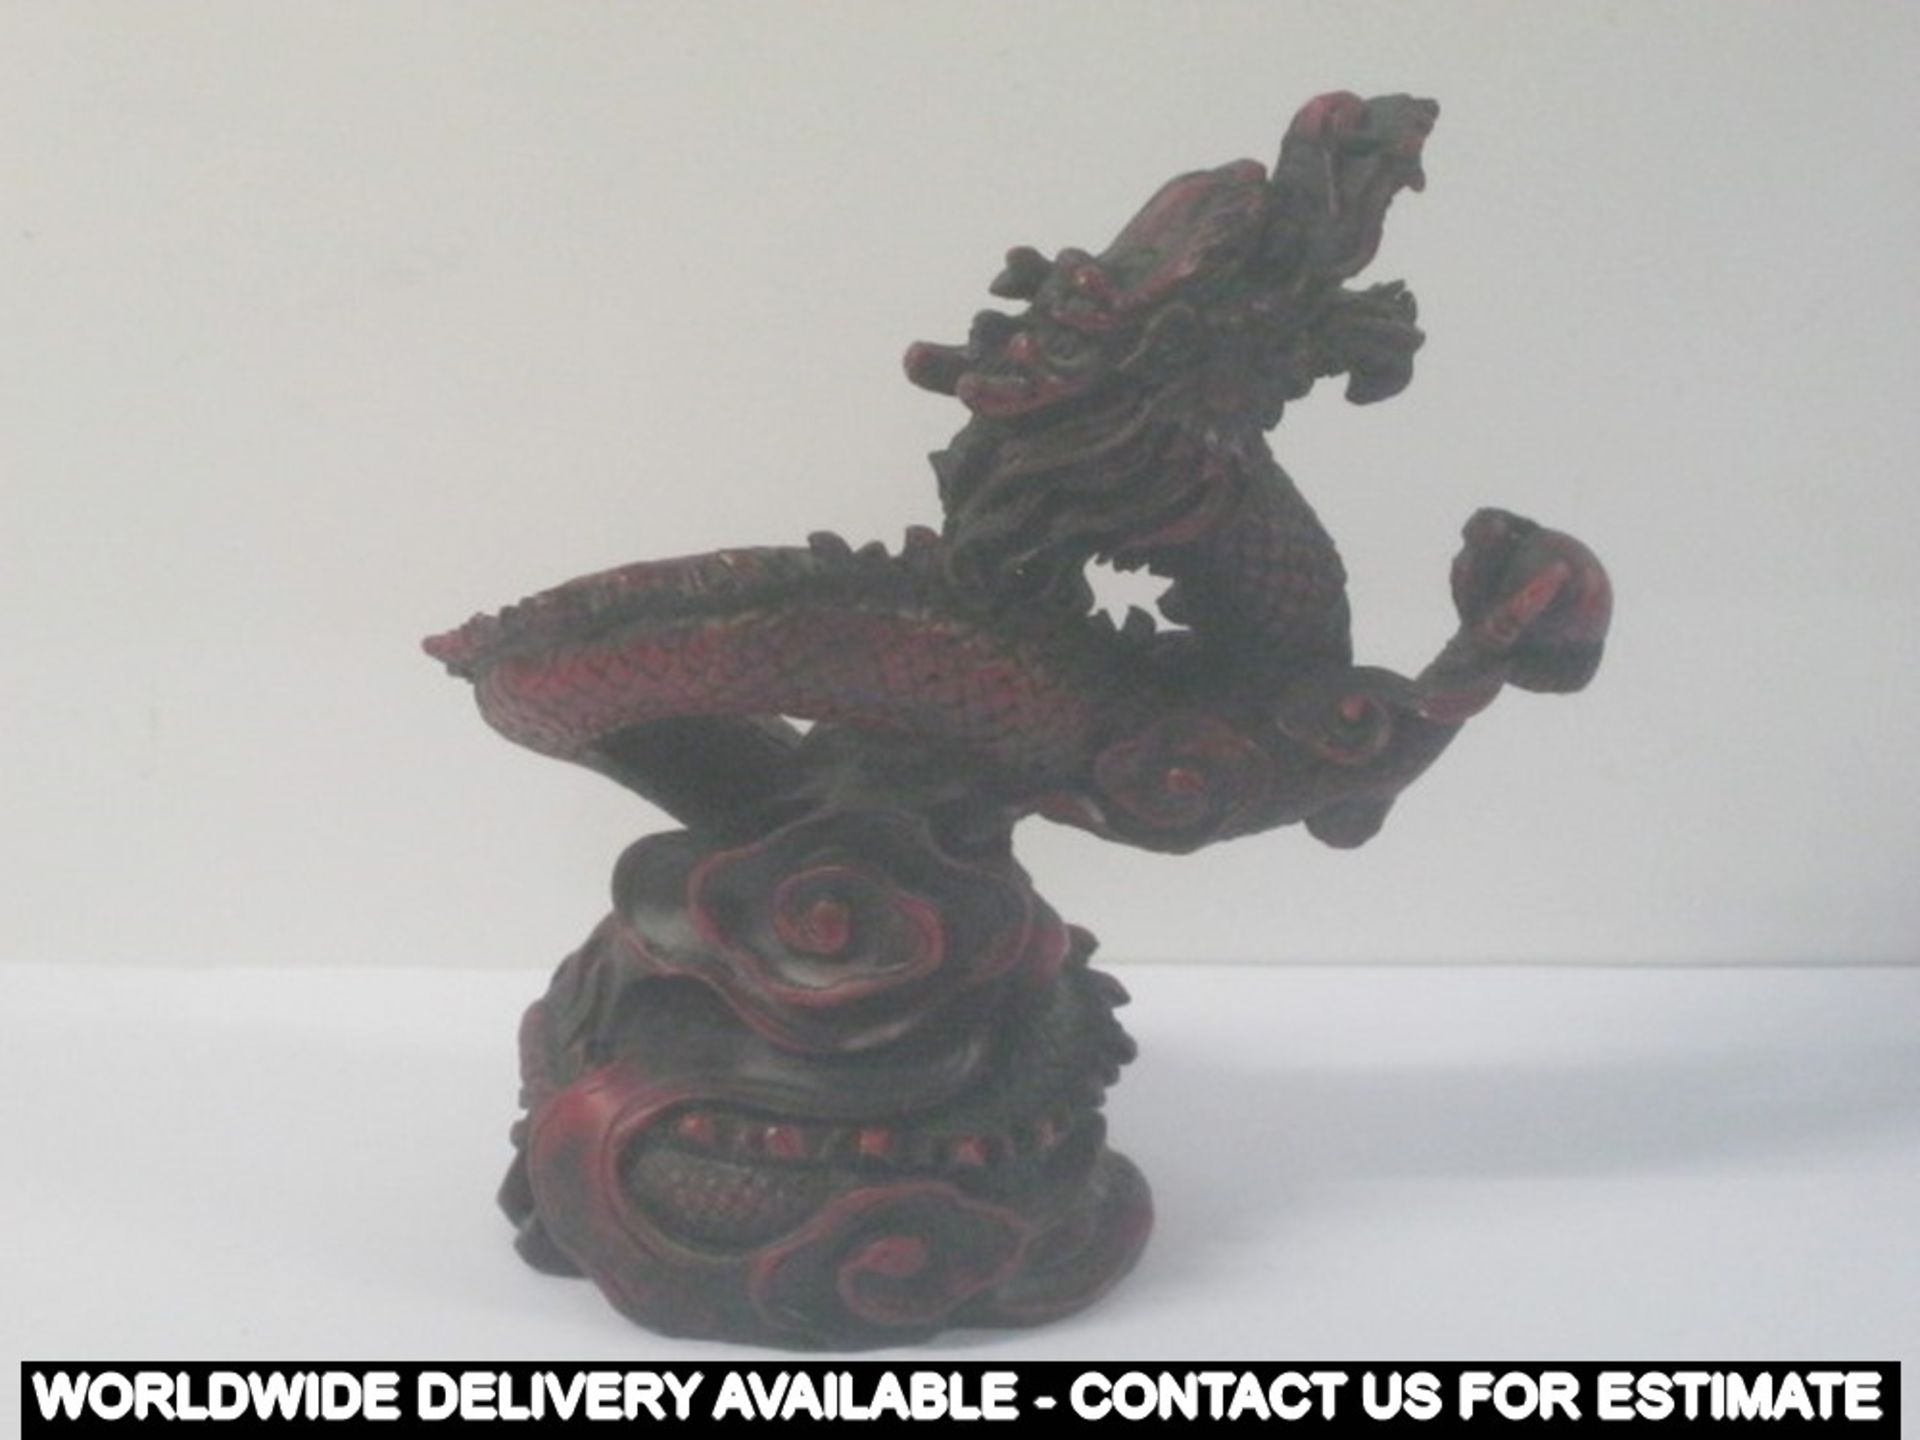 2 x red resin dragons - one marked SINGAPORE and MERLION - Image 5 of 5